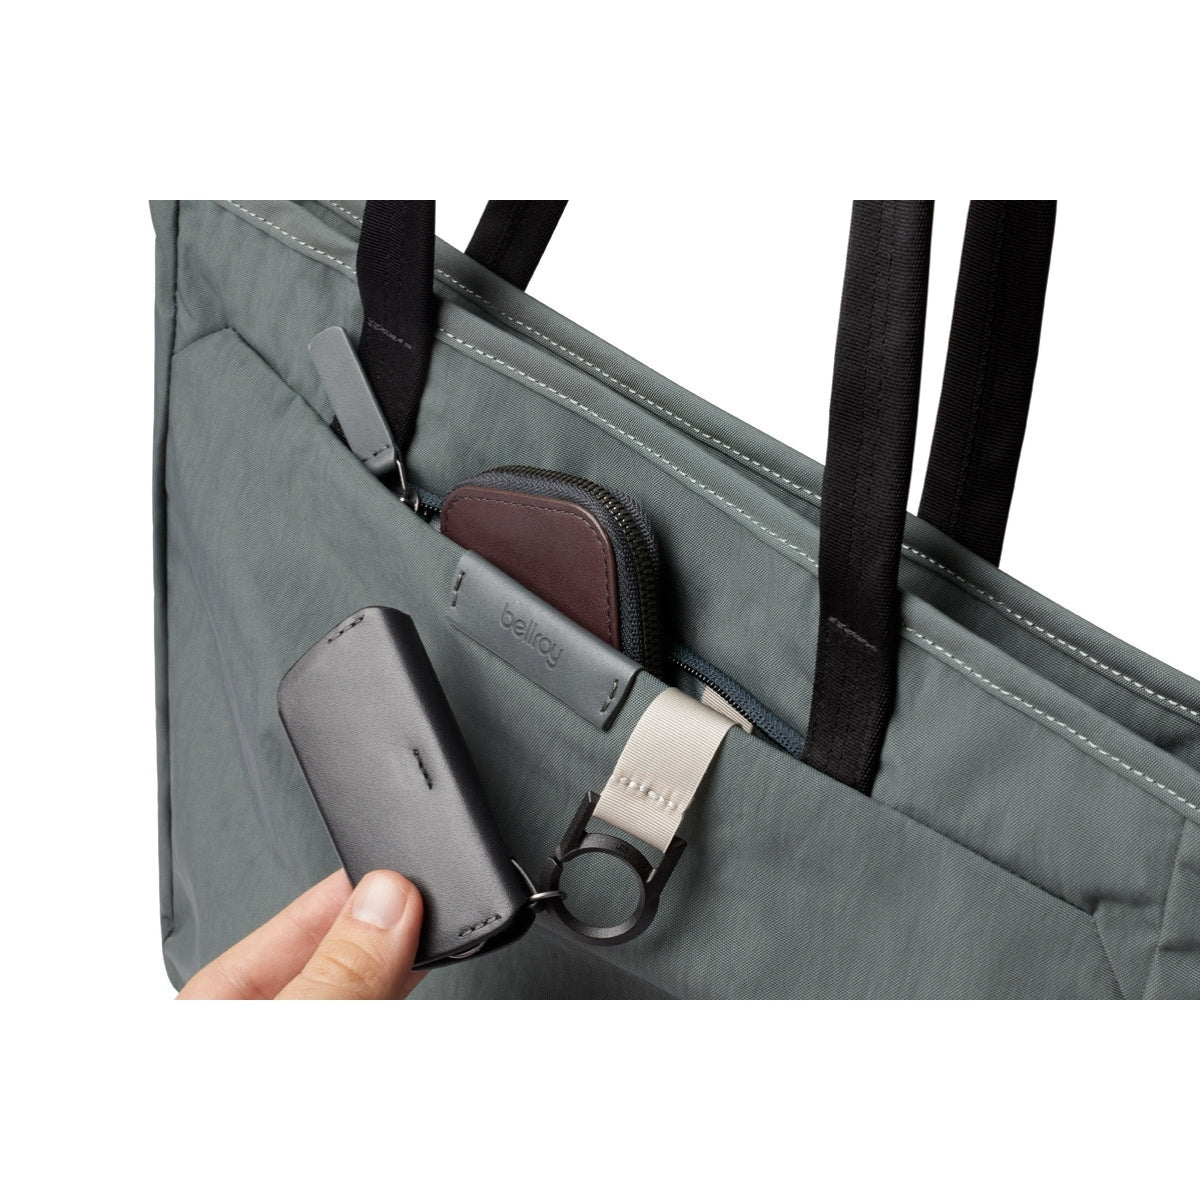 Bellroy Tokyo Tote Compact in Everglade